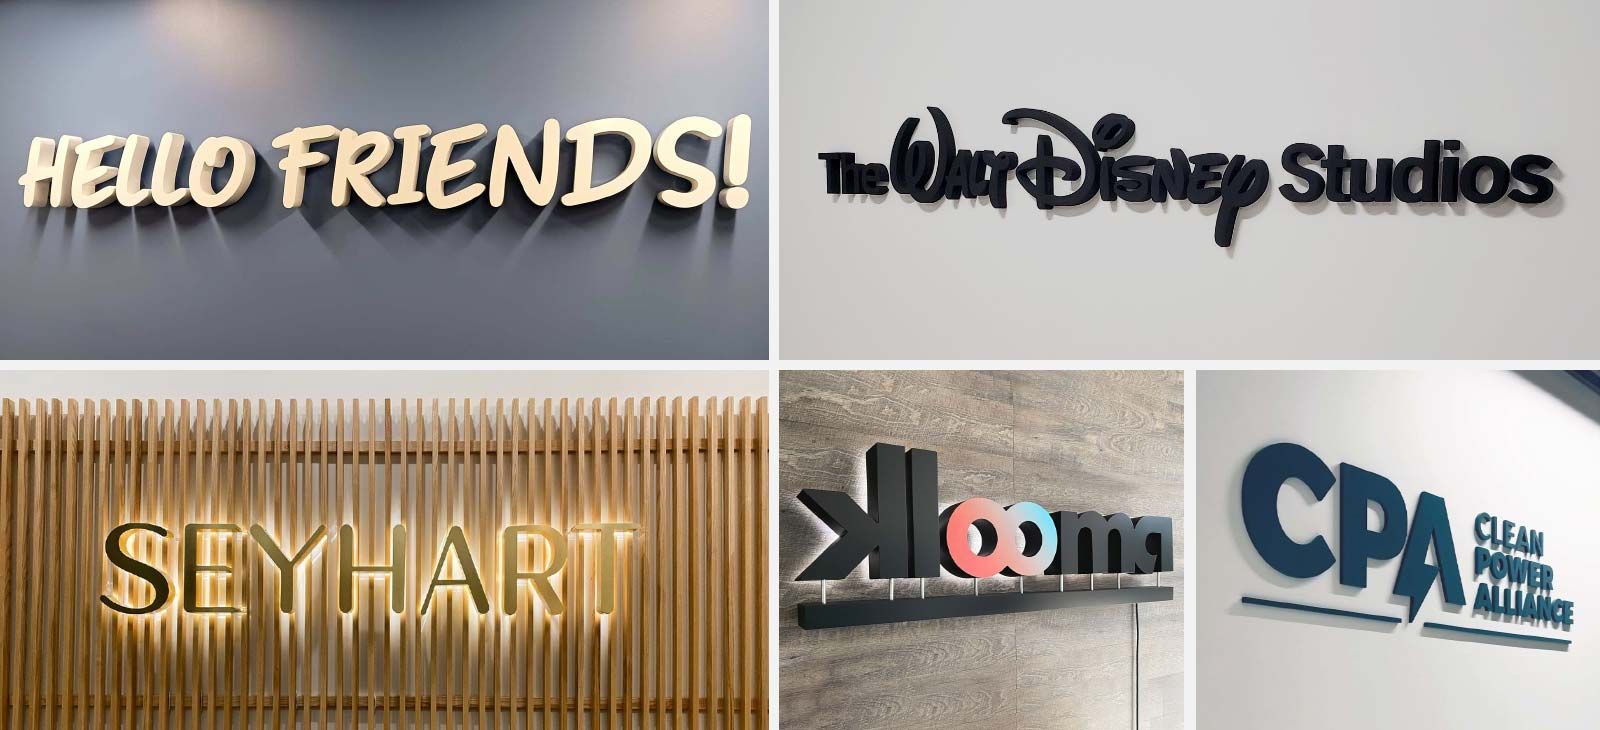 3d wall letters in different fonts, colors and illumination styles for interior office branding